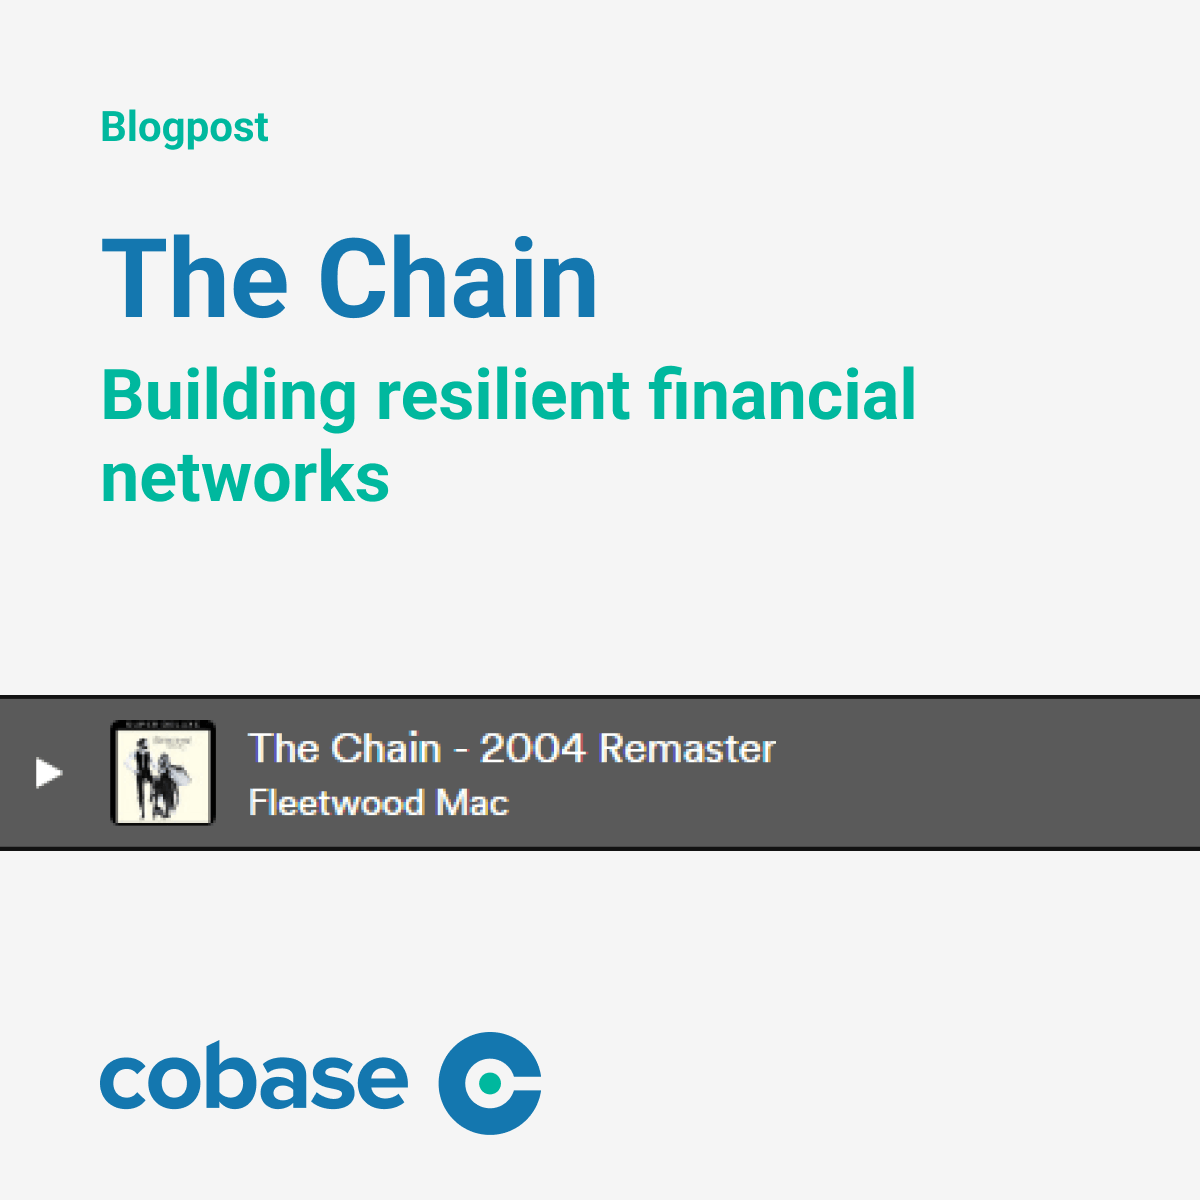 The Chain: Building resilient financial networks